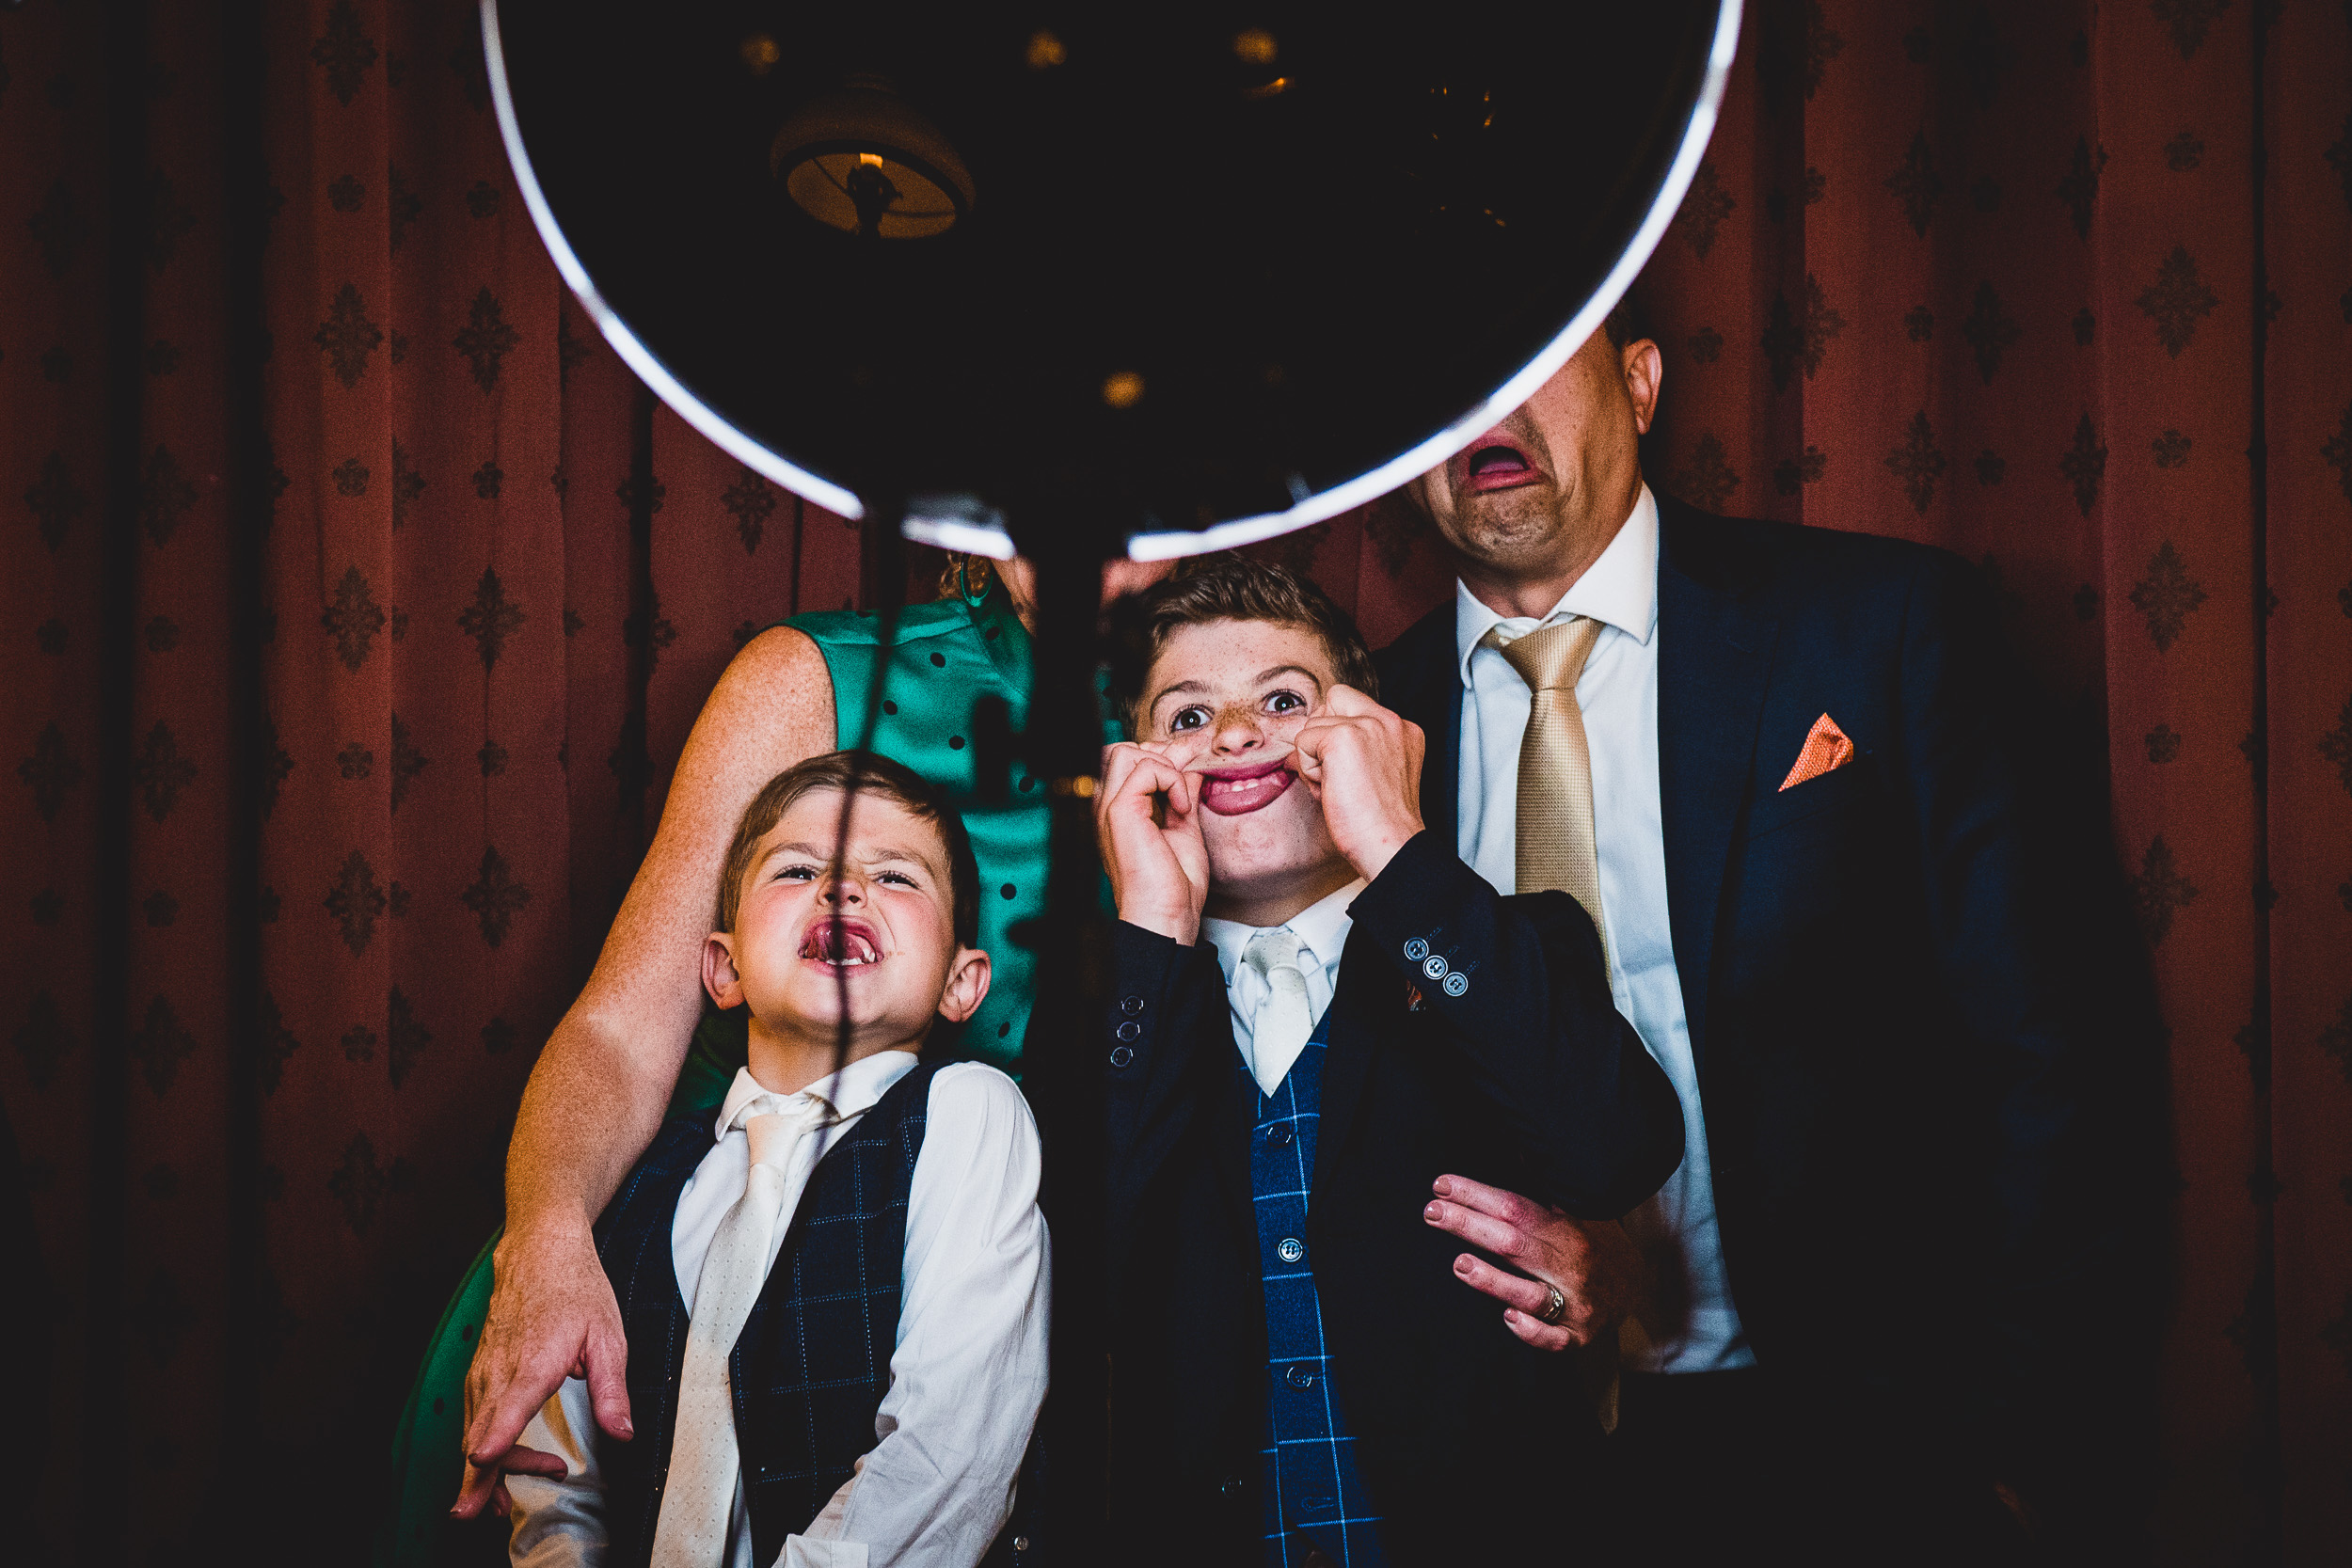 A wedding family photo captured by a wedding photographer in front of a mirror.